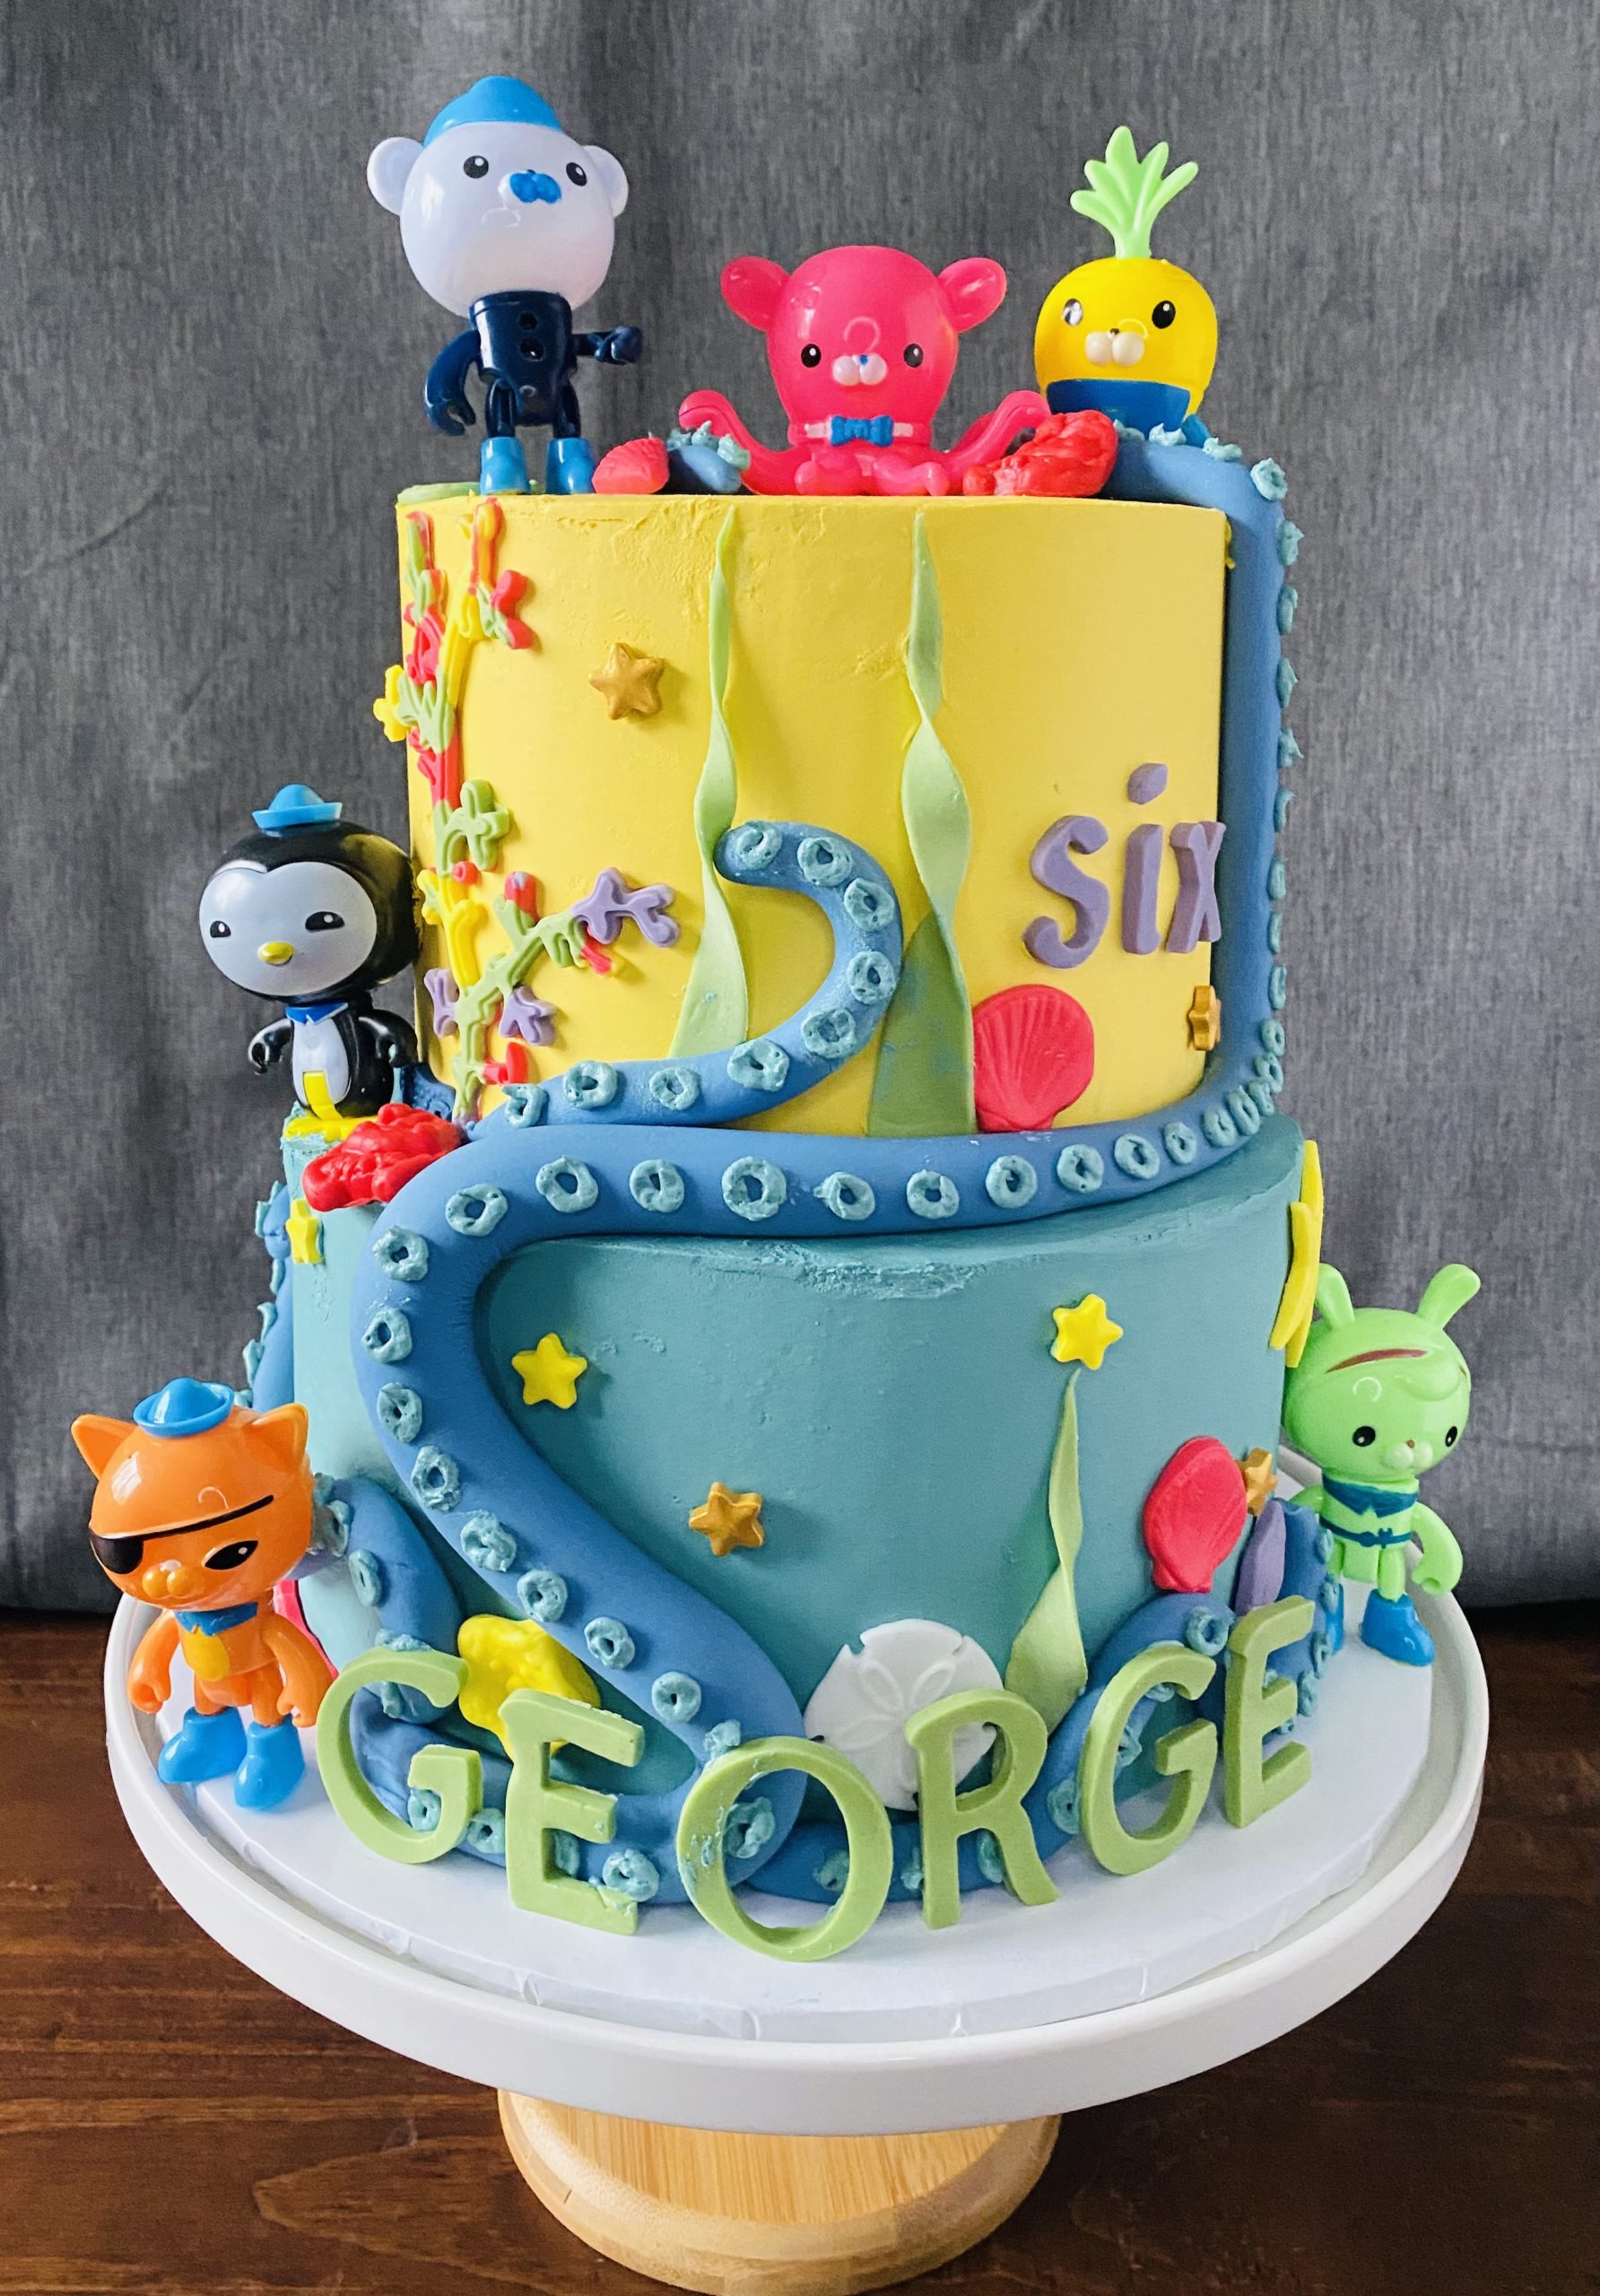 A fantastic children's themed birthday cake with hand-crafted fondant details from Village Patisserie in Toledo, Ohio